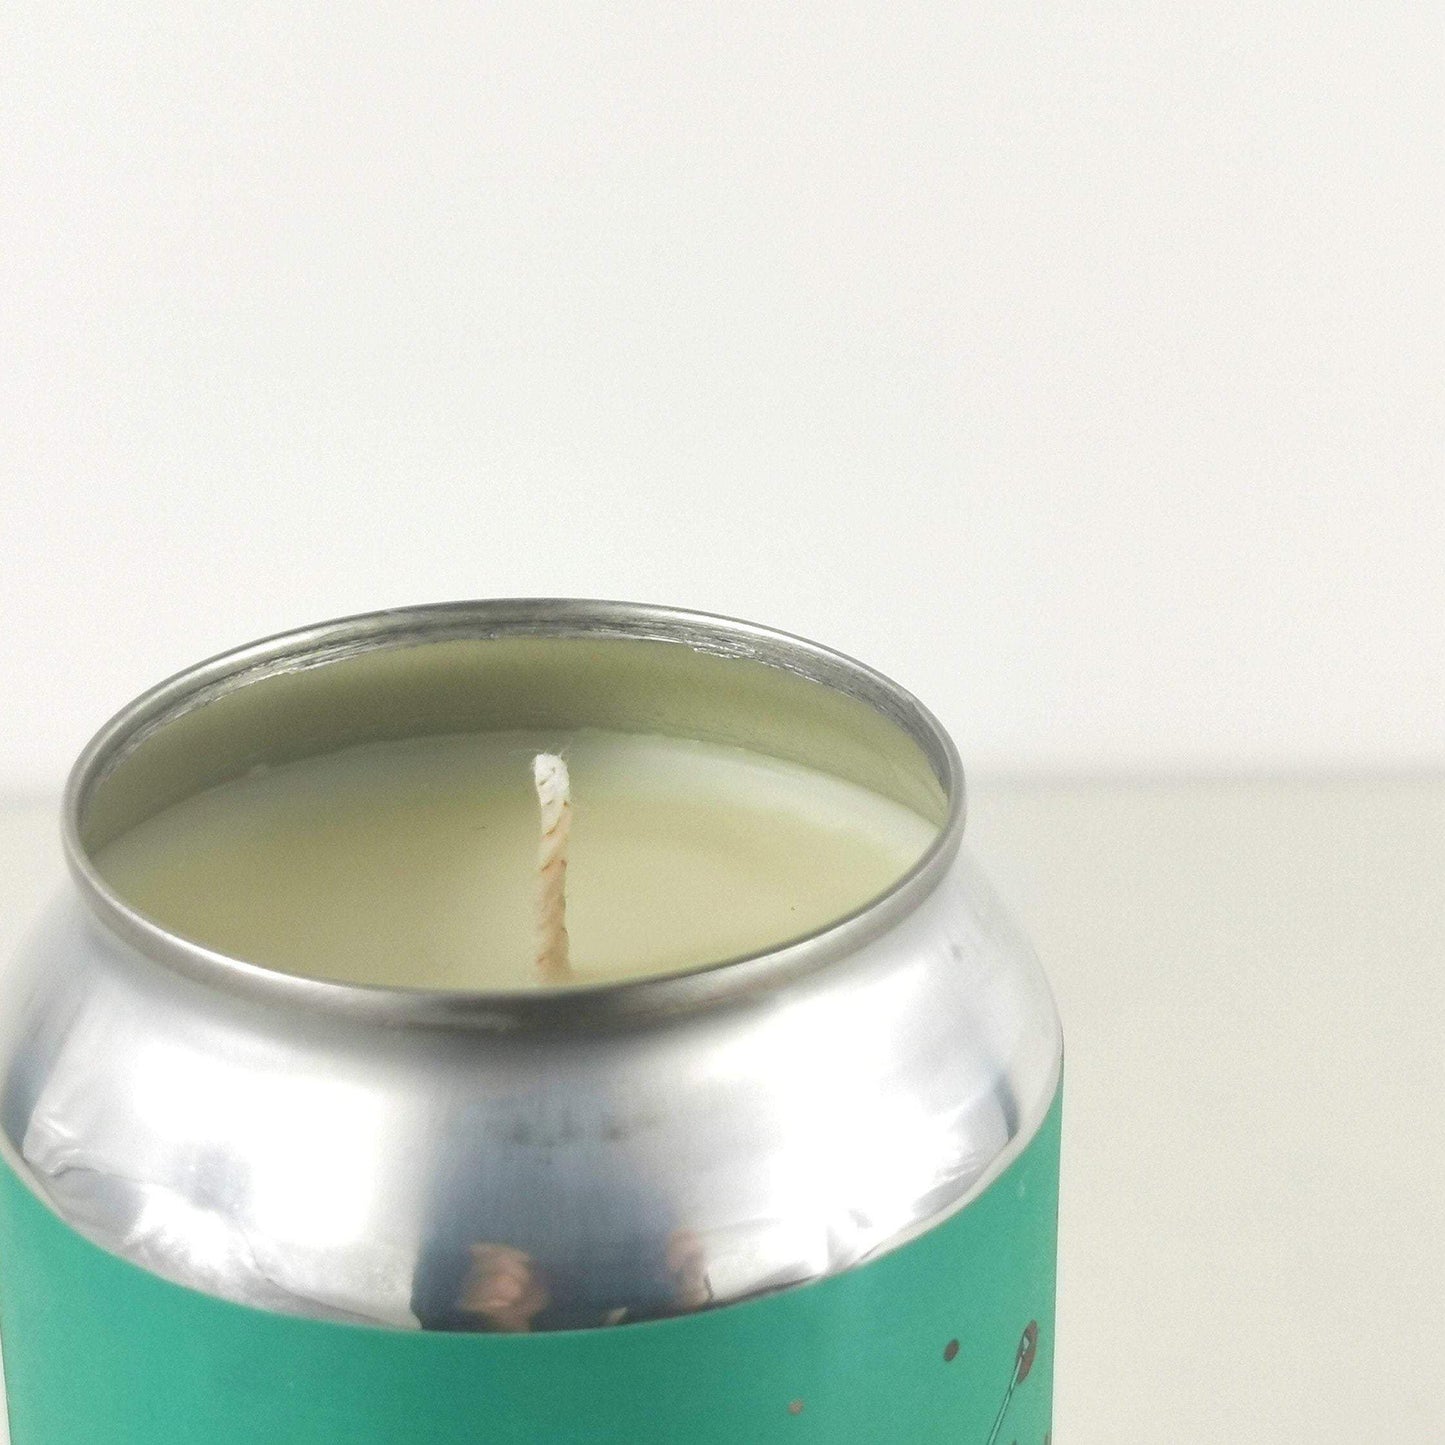 LHG 100% Entertainment Craft Beer Can Candle-Beer Can Candles-Adhock Homeware